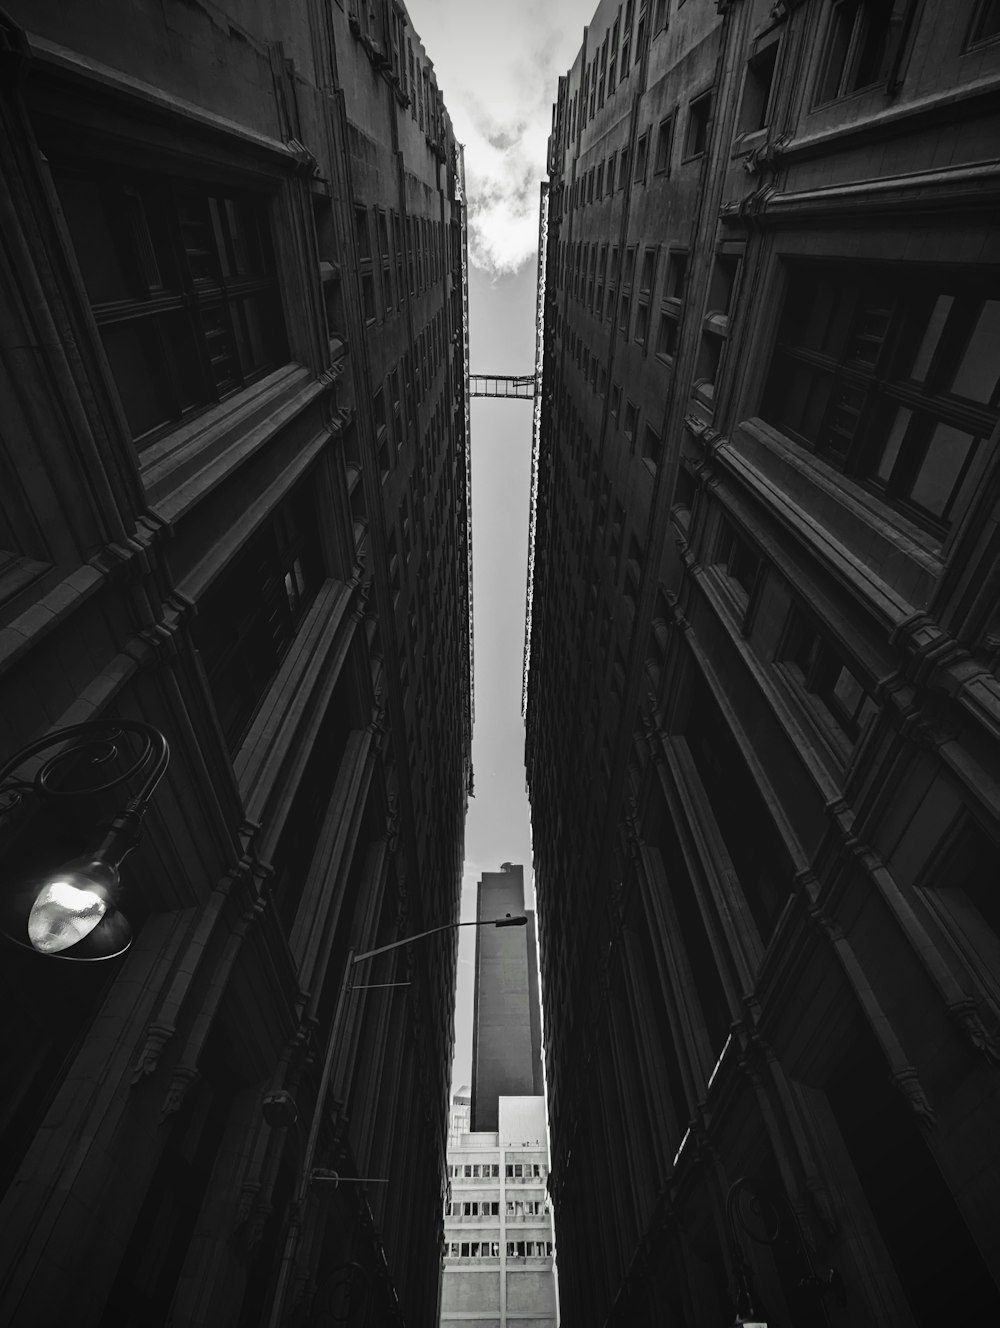 a view looking up at tall buildings